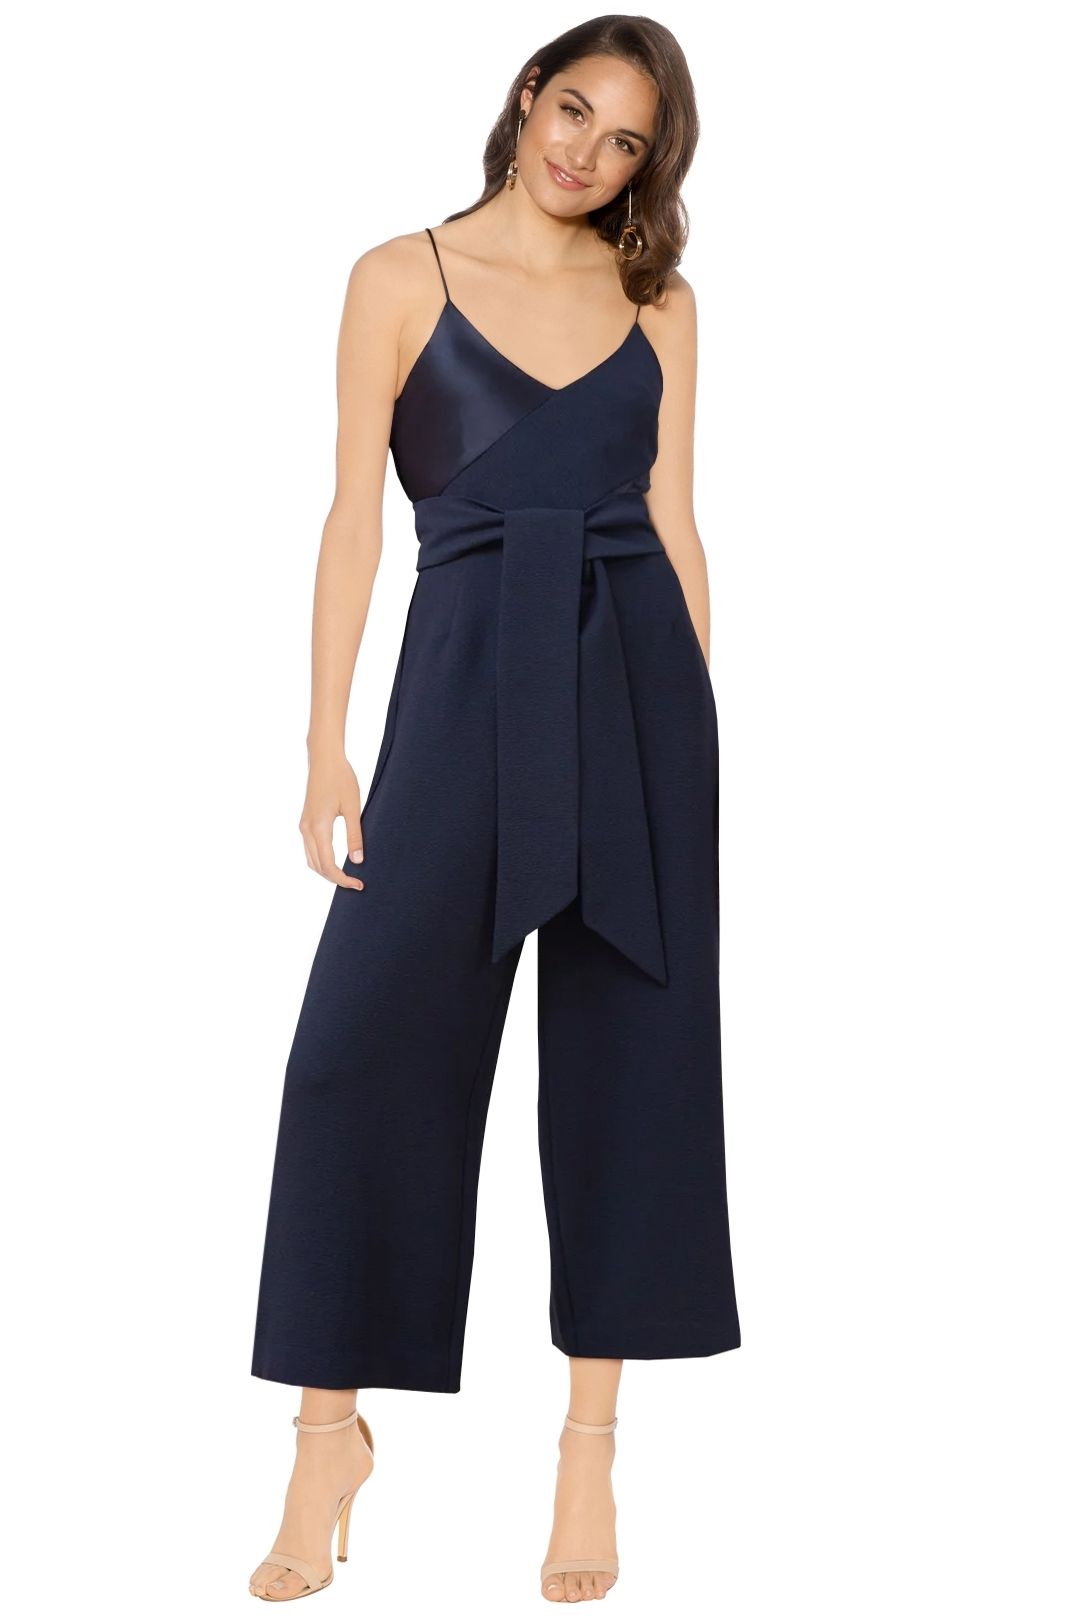 C/MEO Collective - Translation Jumpsuit - Navy - Front